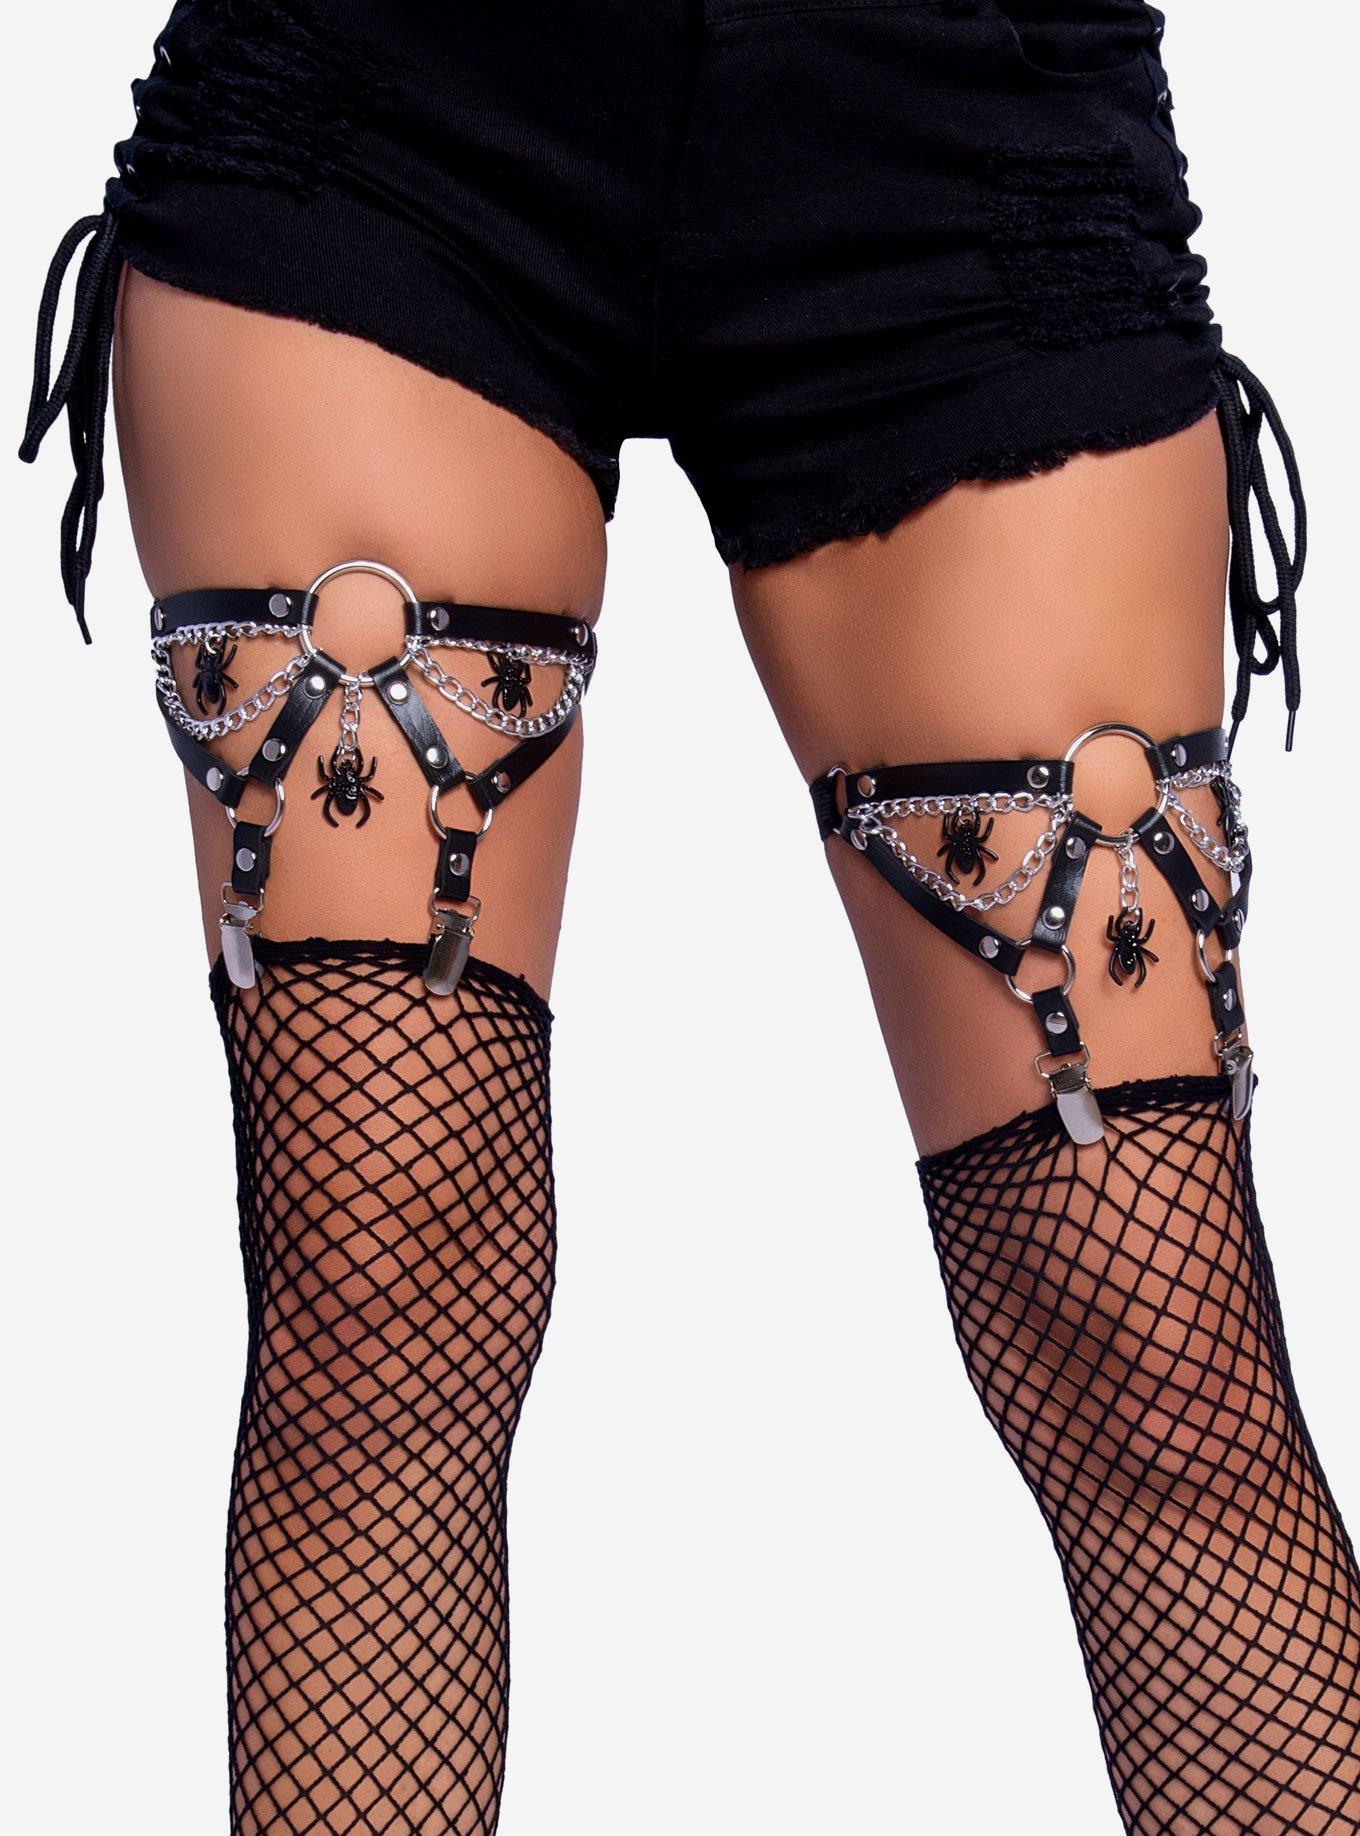 Spider-Ring Thigh High Garter Suspender with Chain Hot Topic image image